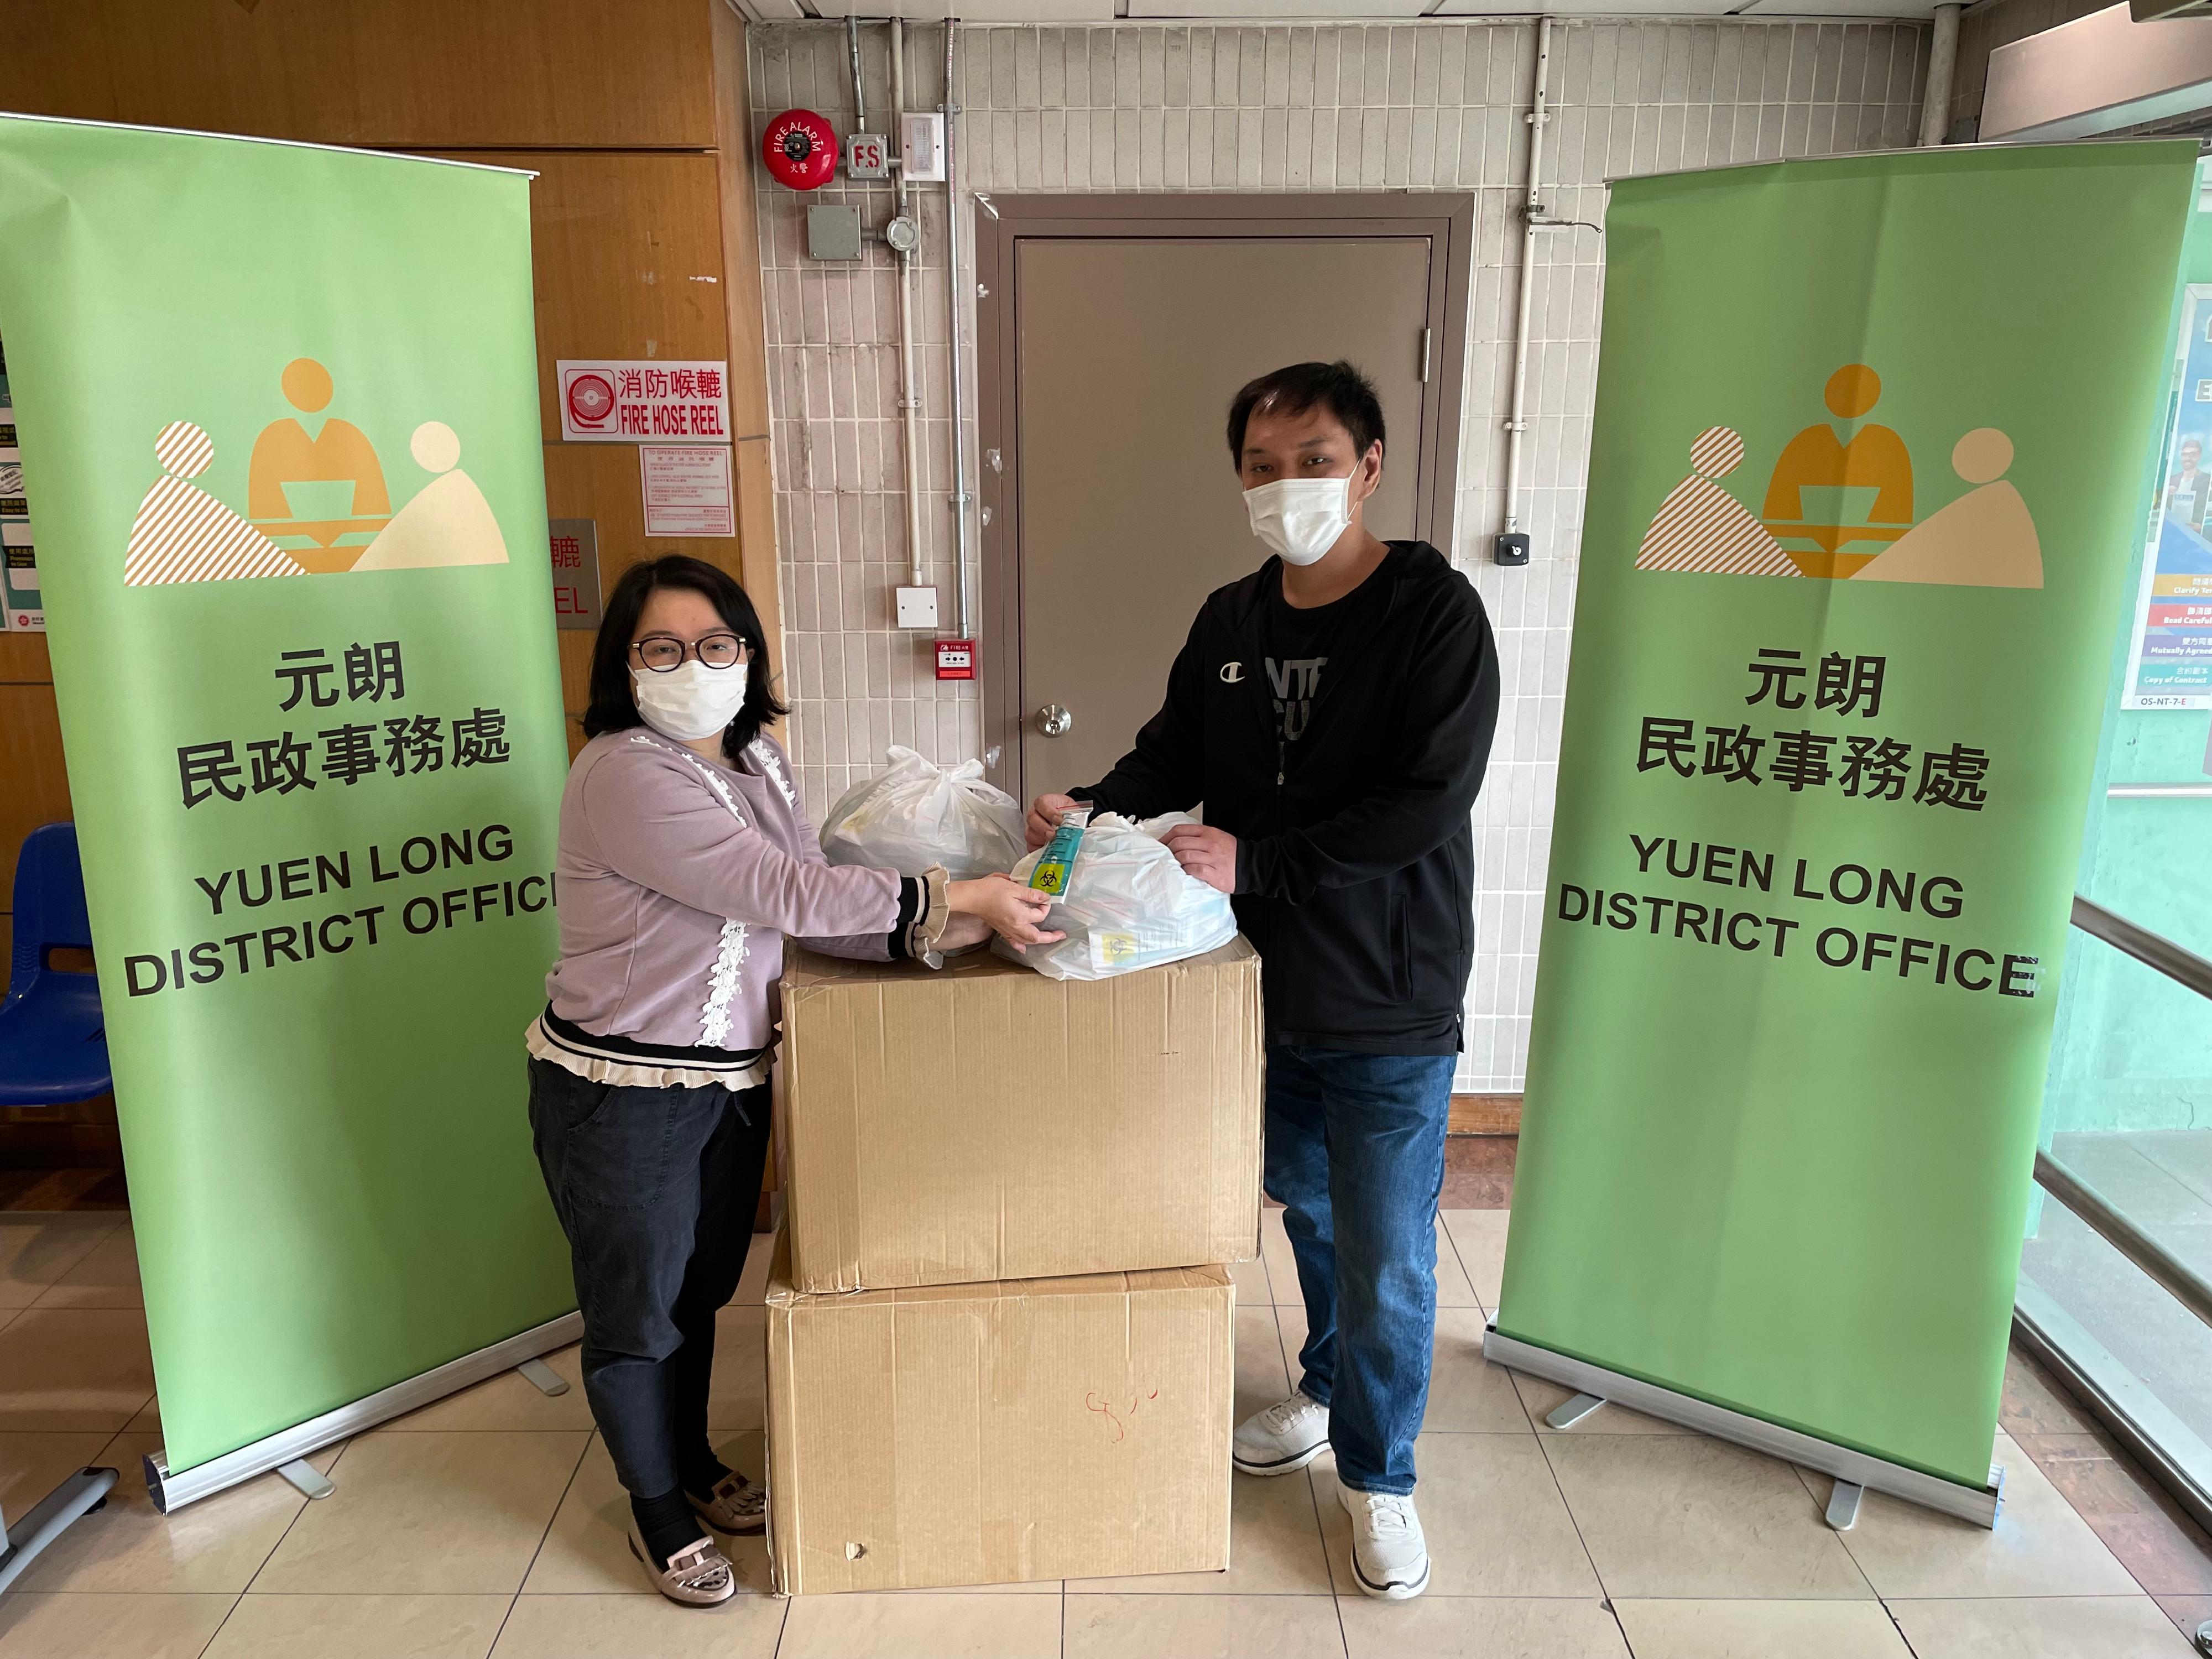 The Yuen Long District Office today (February 15) distributed COVID-19 rapid test kits to households, cleansing workers and property management staff living and working in Hung Foon House for voluntary testing through the property management company of Hung Fuk Estate. 